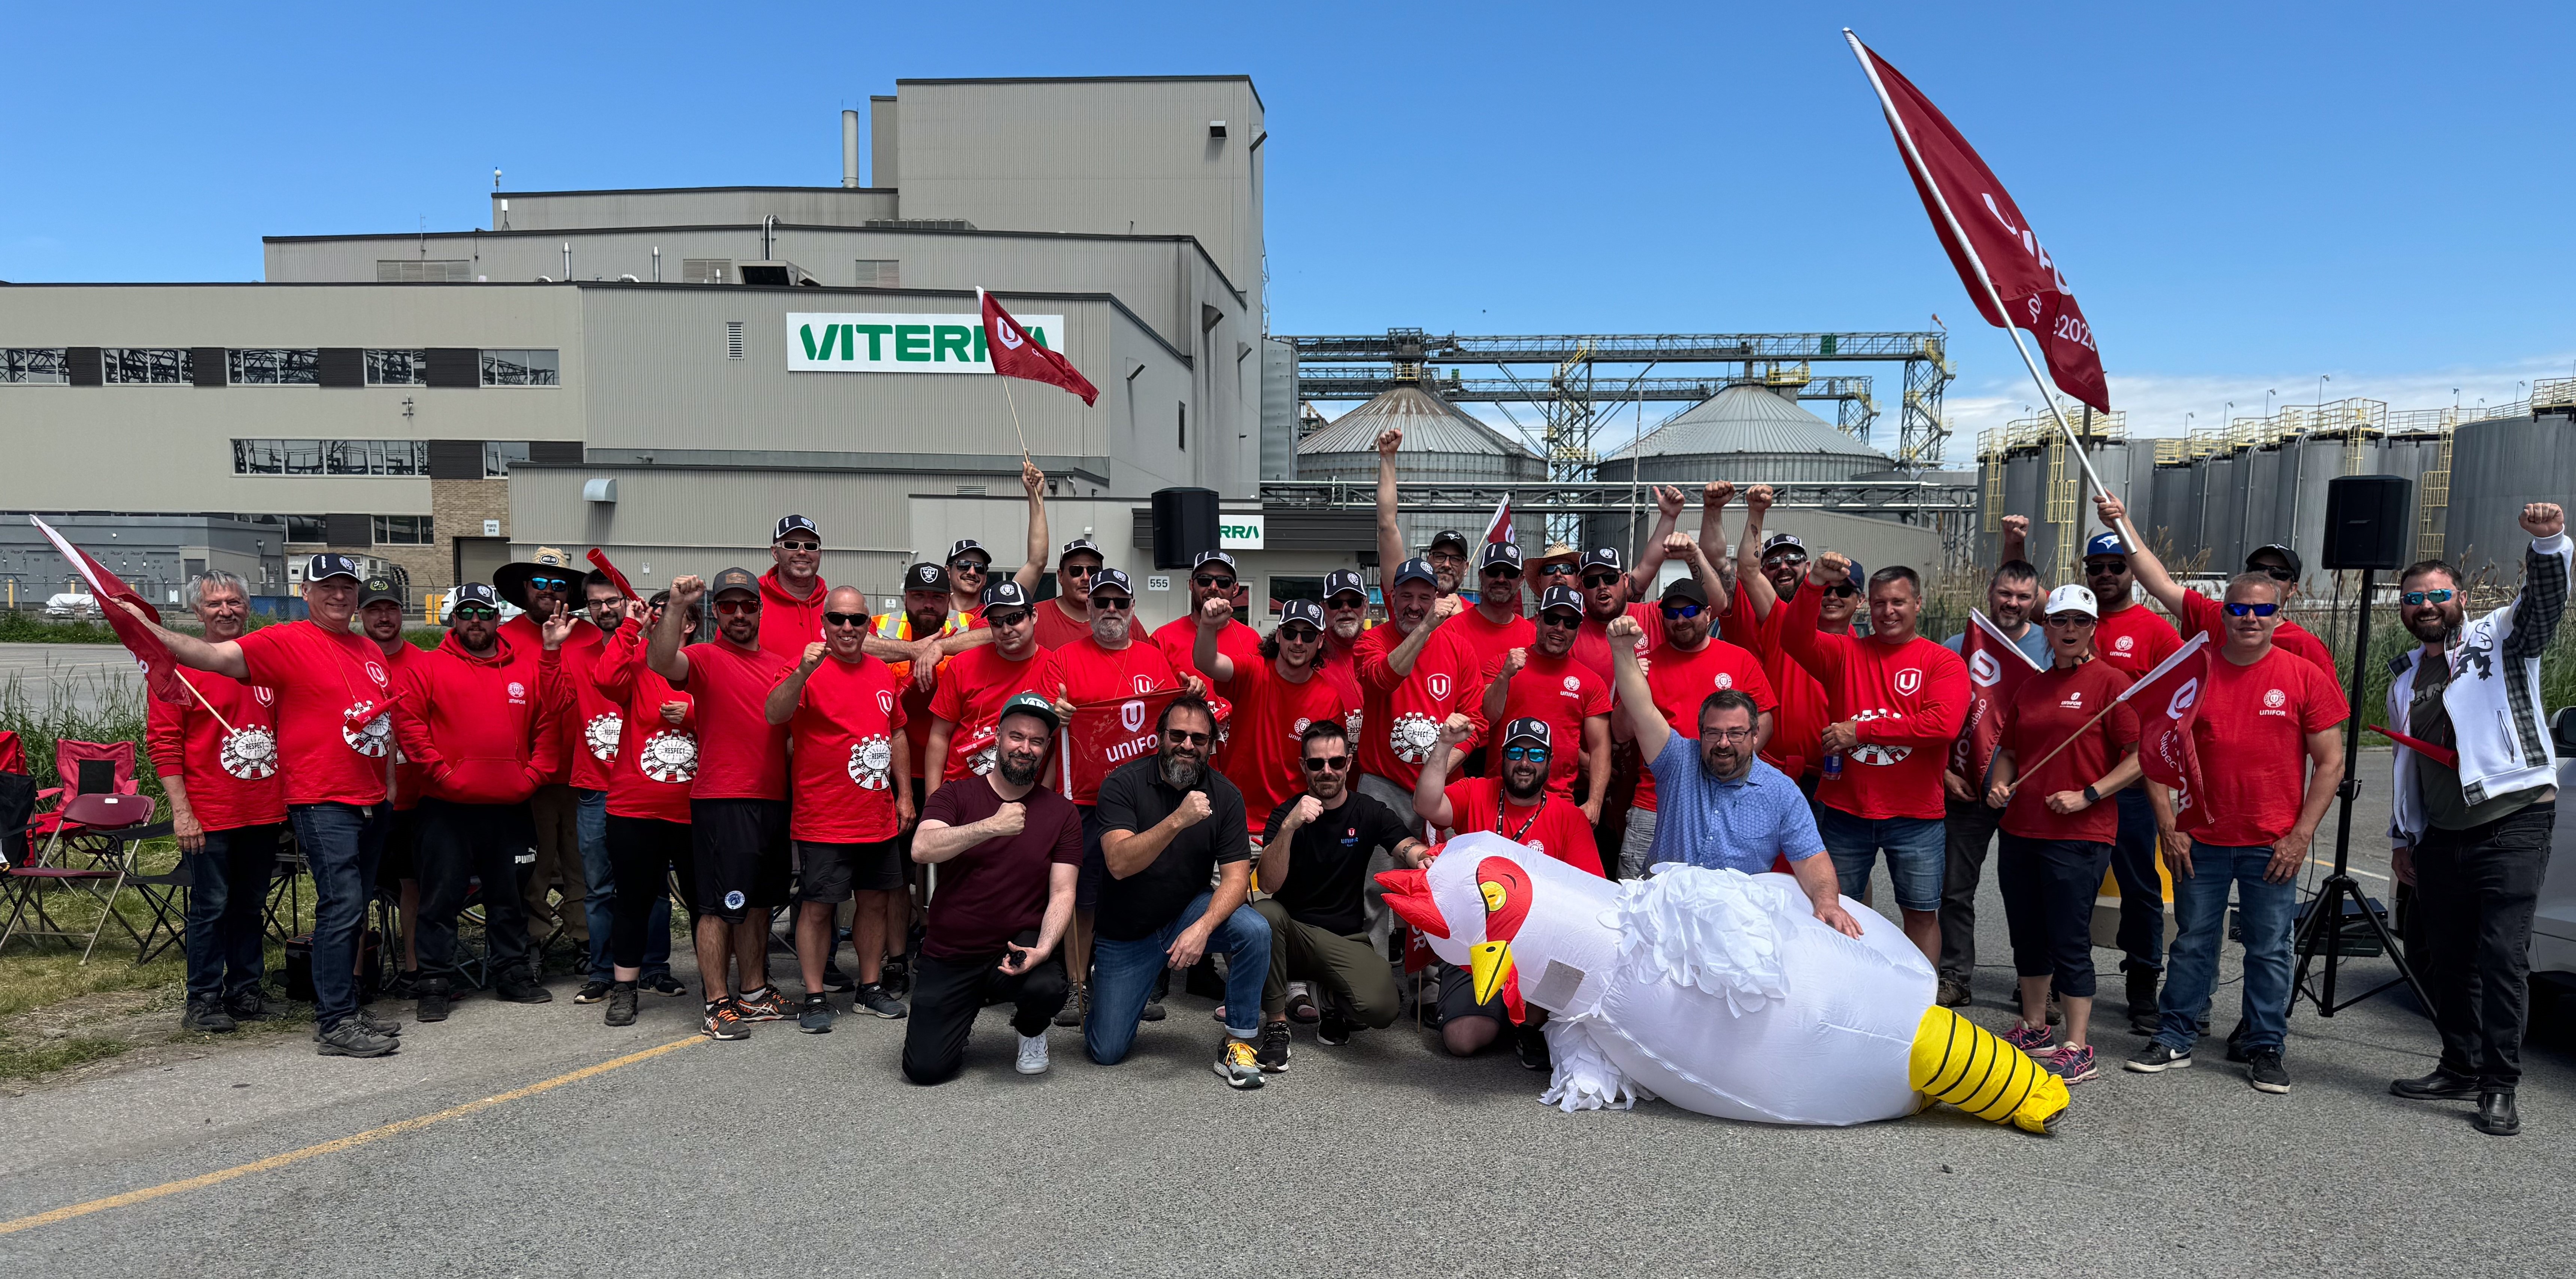 Viterra strikers posing in a group shot in front of the Viterra building with fists in the air and a person disguised as a chicken 